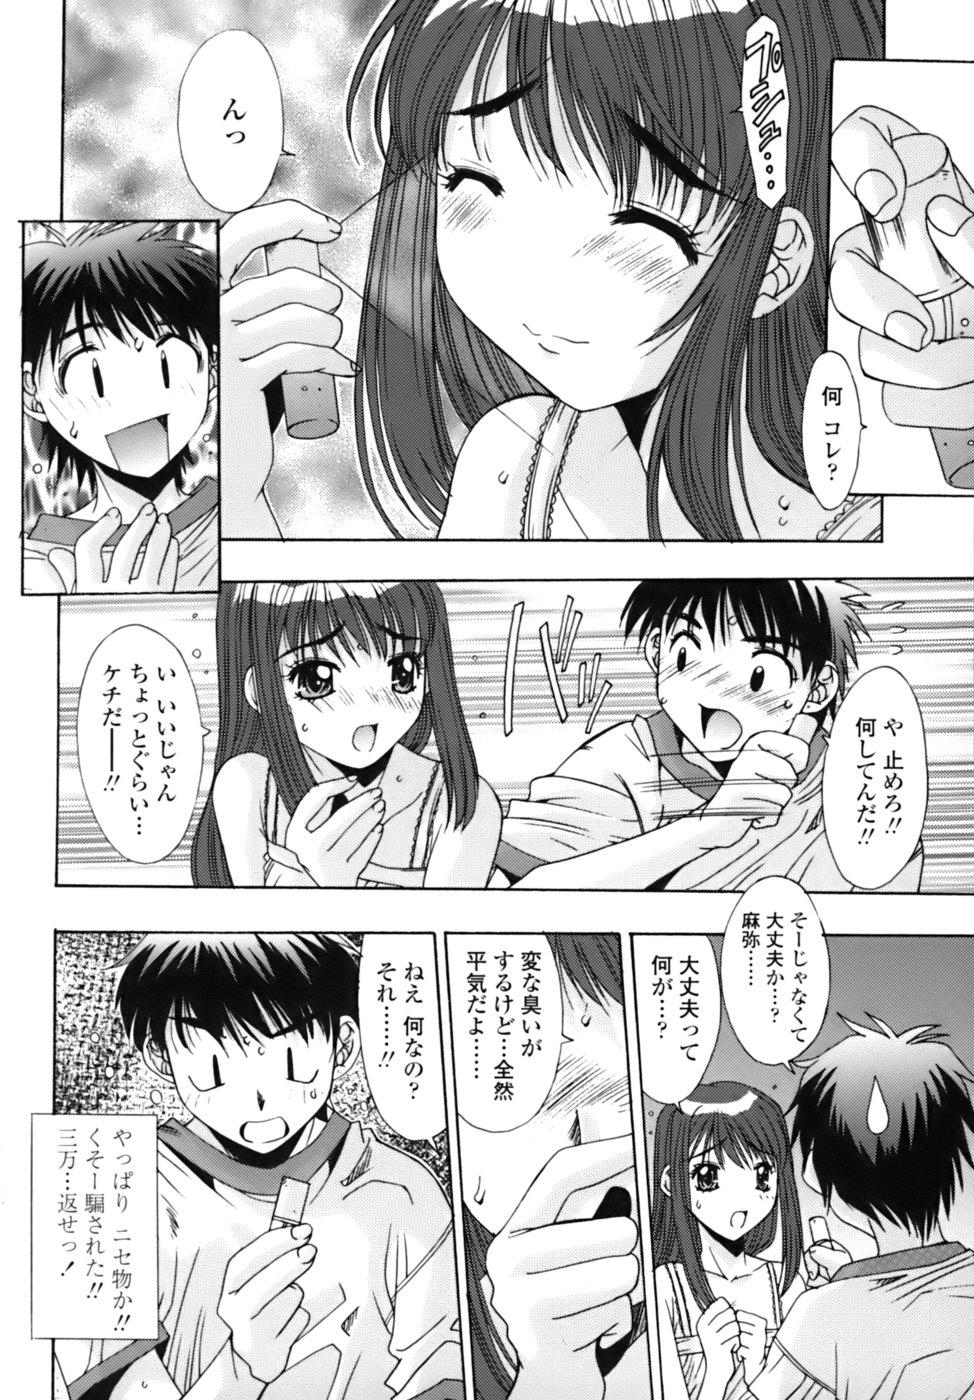 Little Sange No Koku - At the Time of Scattering Flowers Couple - Page 11